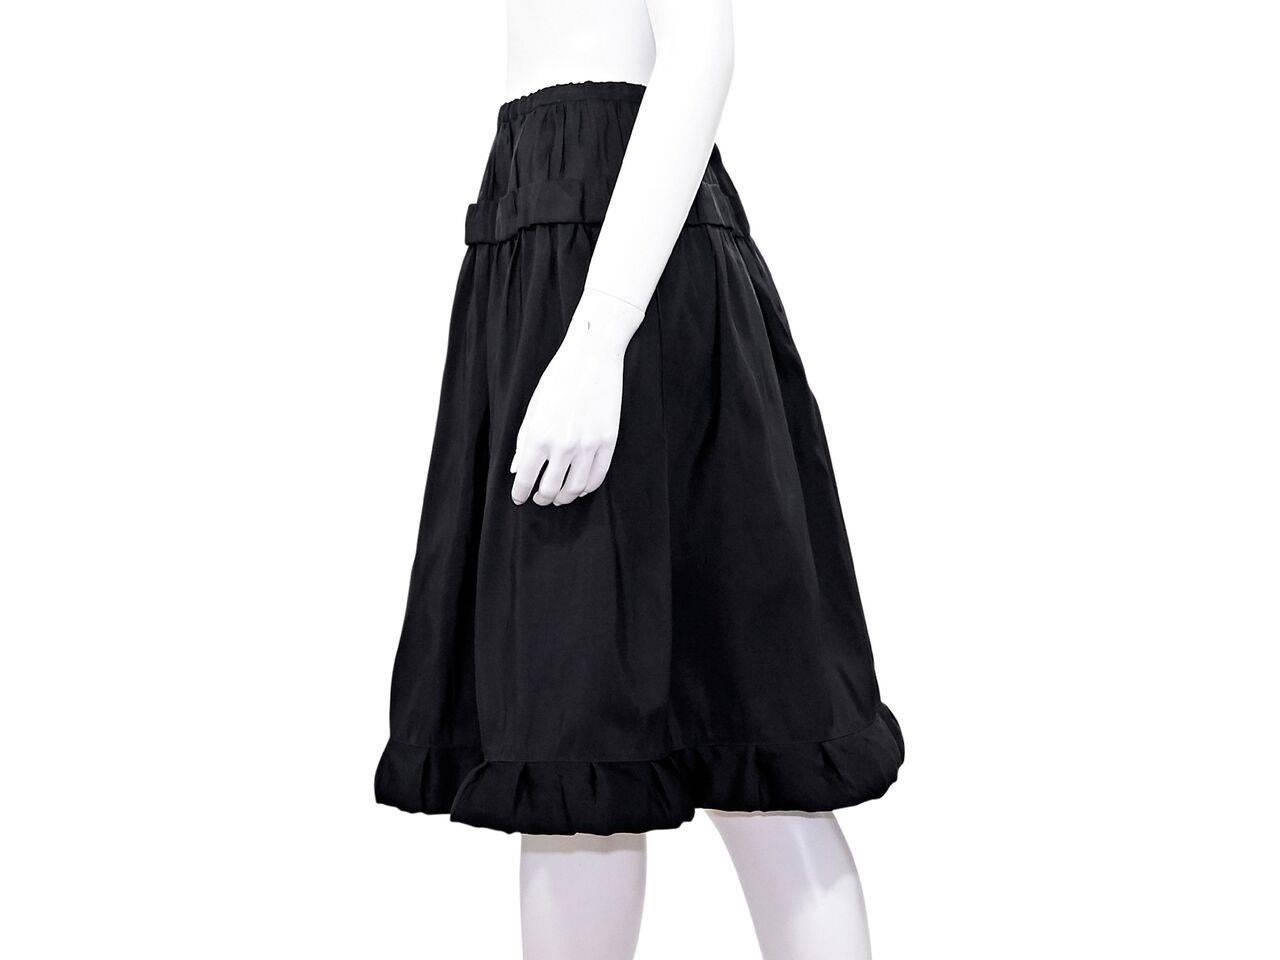 Product details:  Black silk A-line skirt by Lanvin.  Side zip closure.  
Condition: Pre-owned. Very good.
Est. Retail $ 795.00